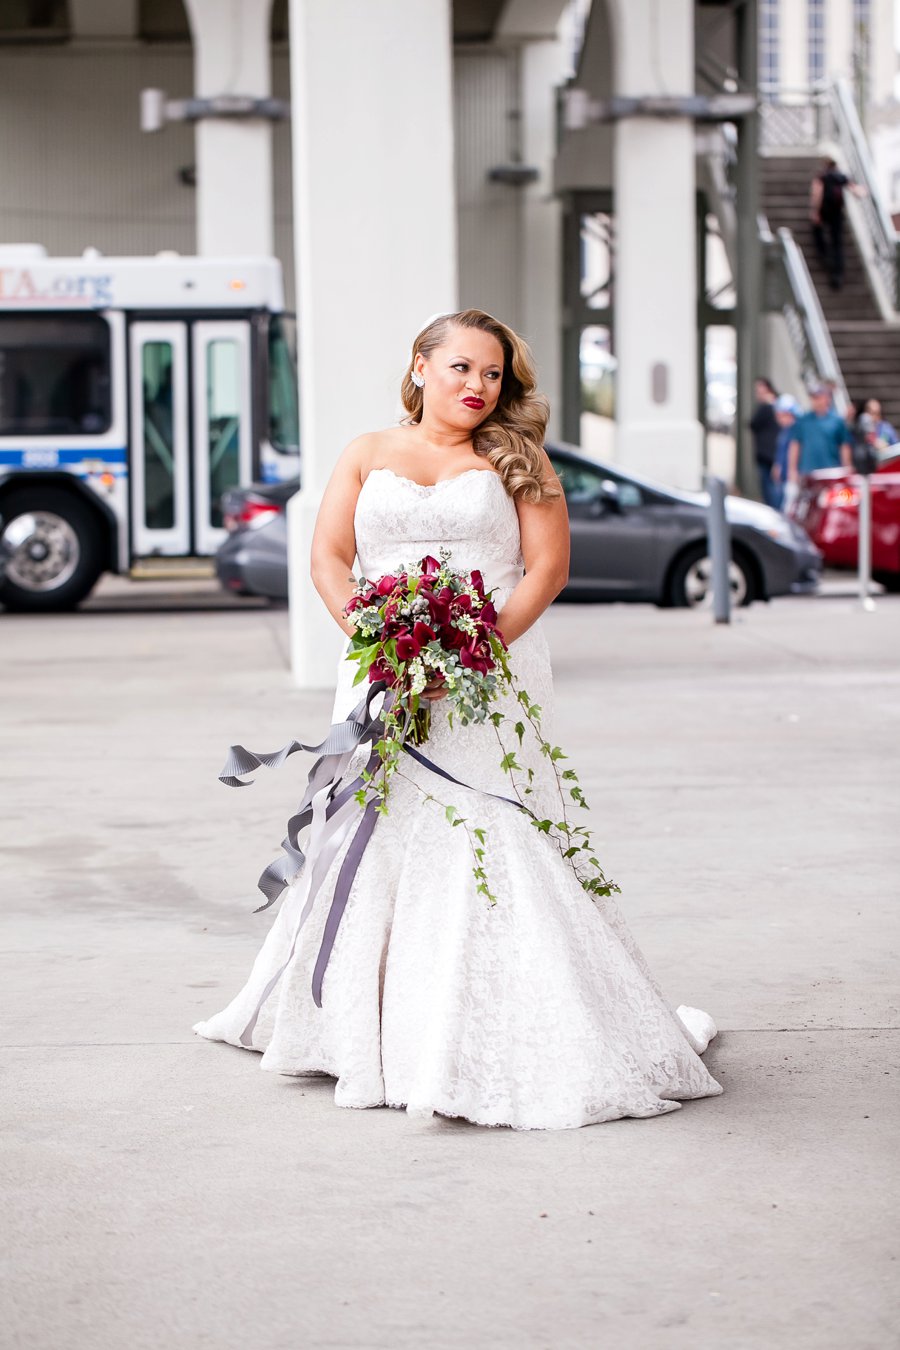 A Jewel Toned and Gold Industrial Nashville Wedding via TheELD.com